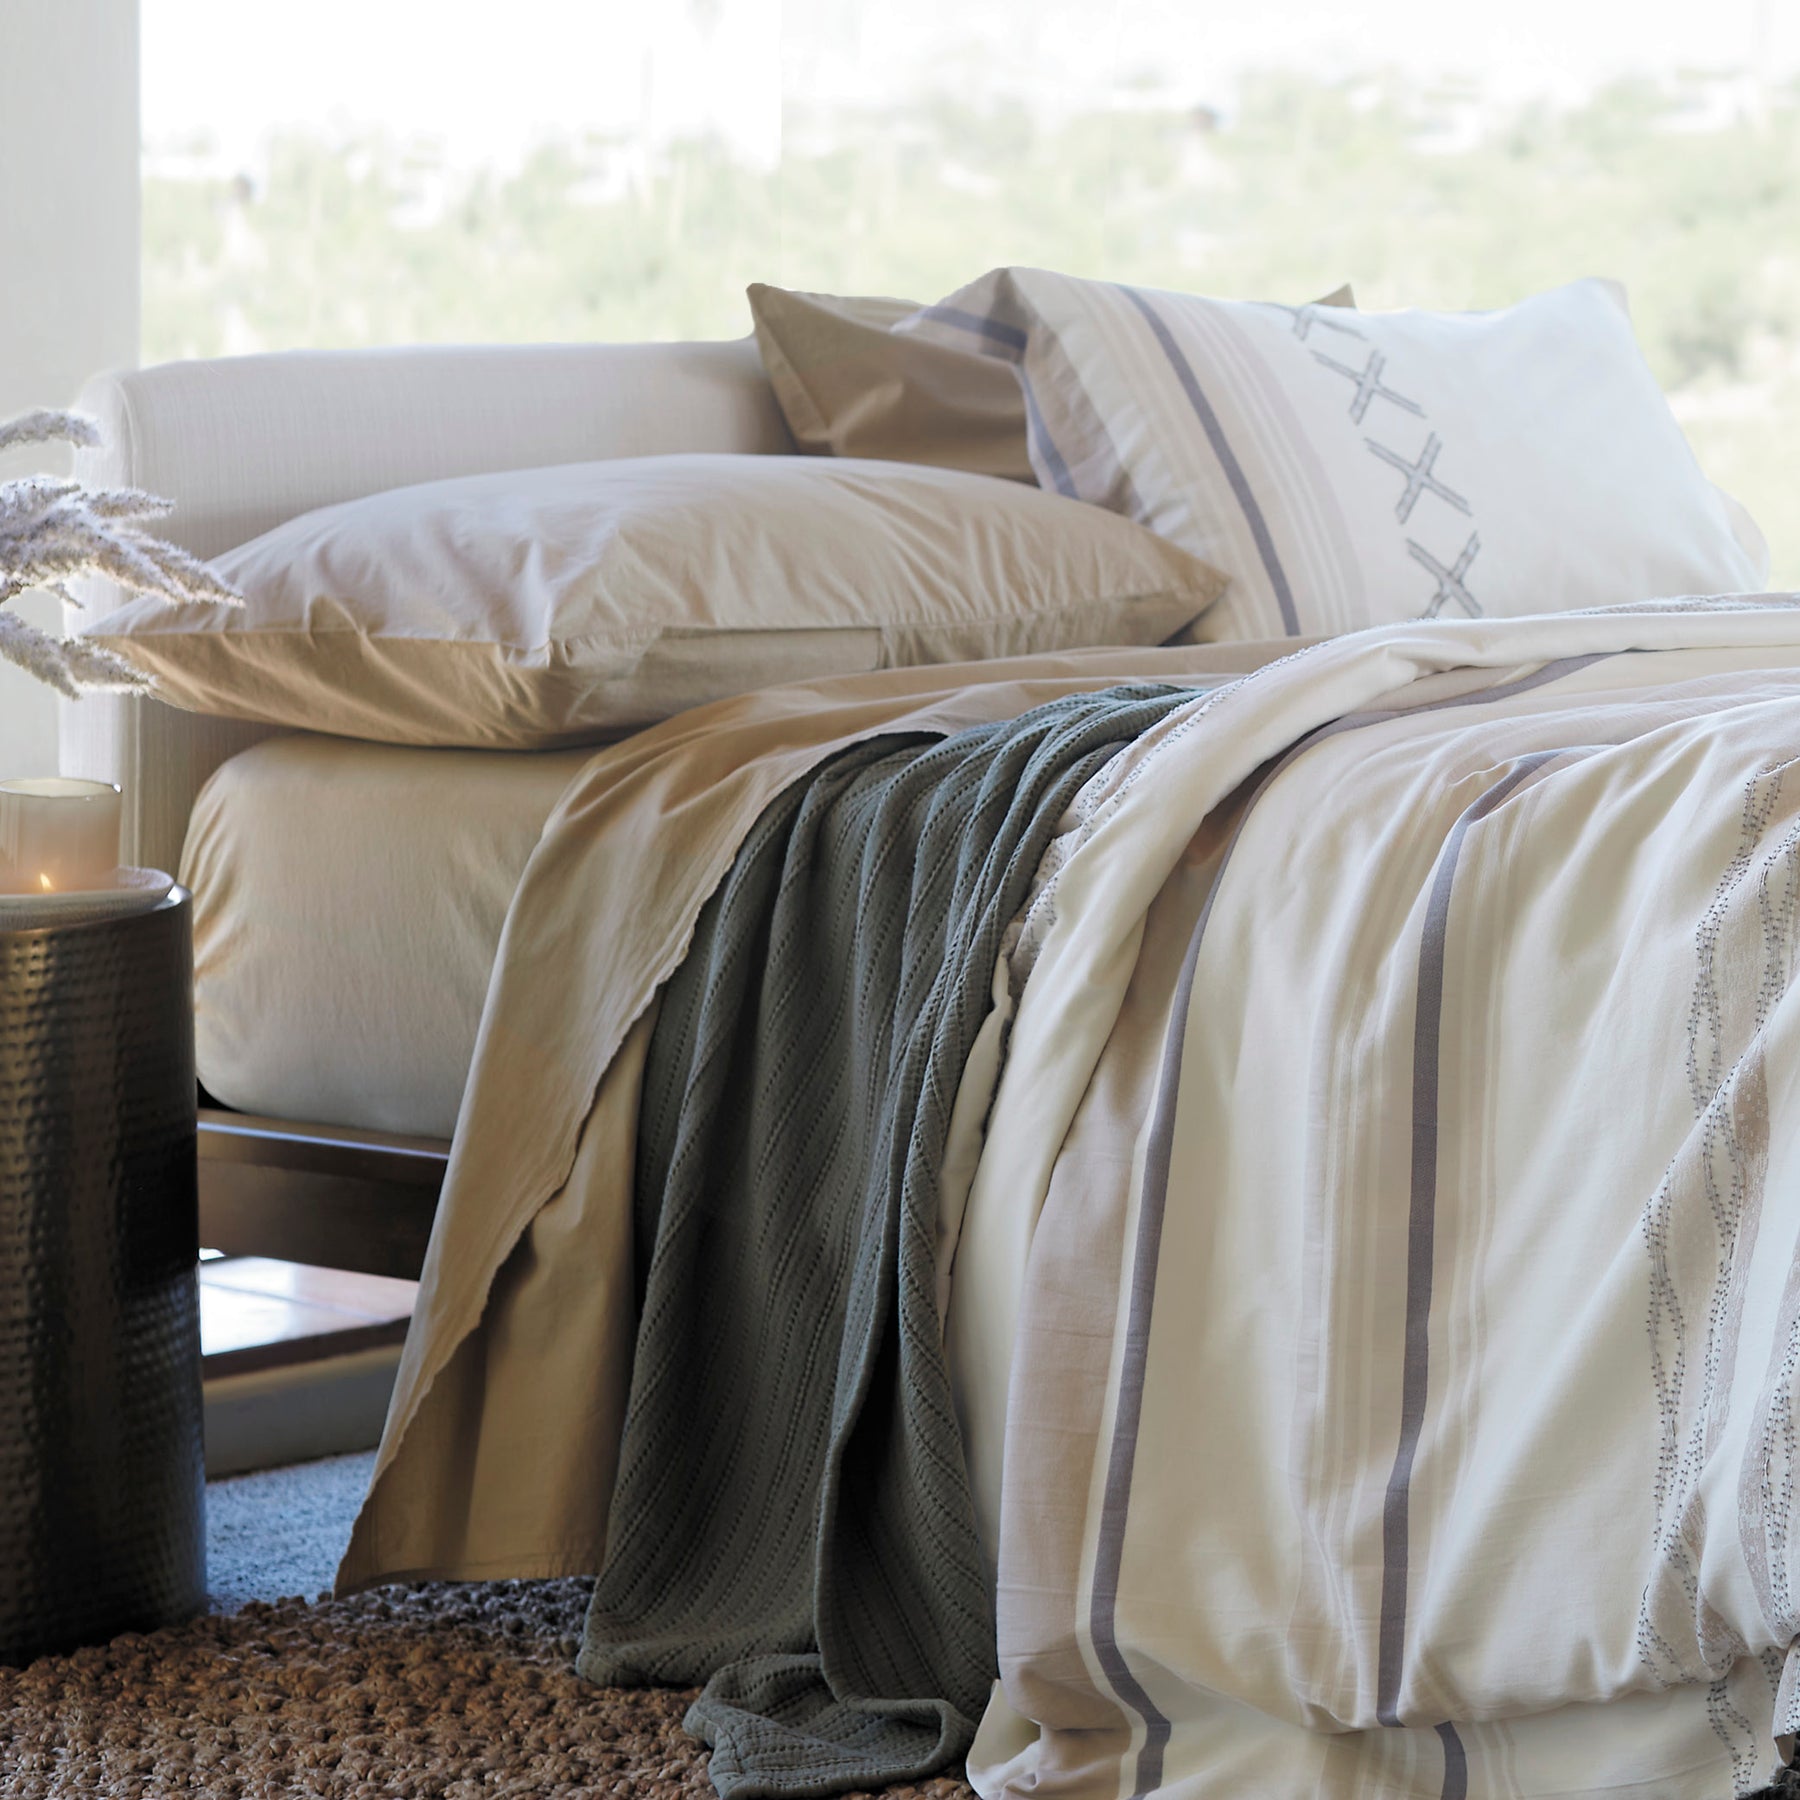 Image of a naturally-made bed with Ochre Garment Washed Percale Sheets, an Agave Ridgeback Coverlet, and a Sonoran Duvet Cover